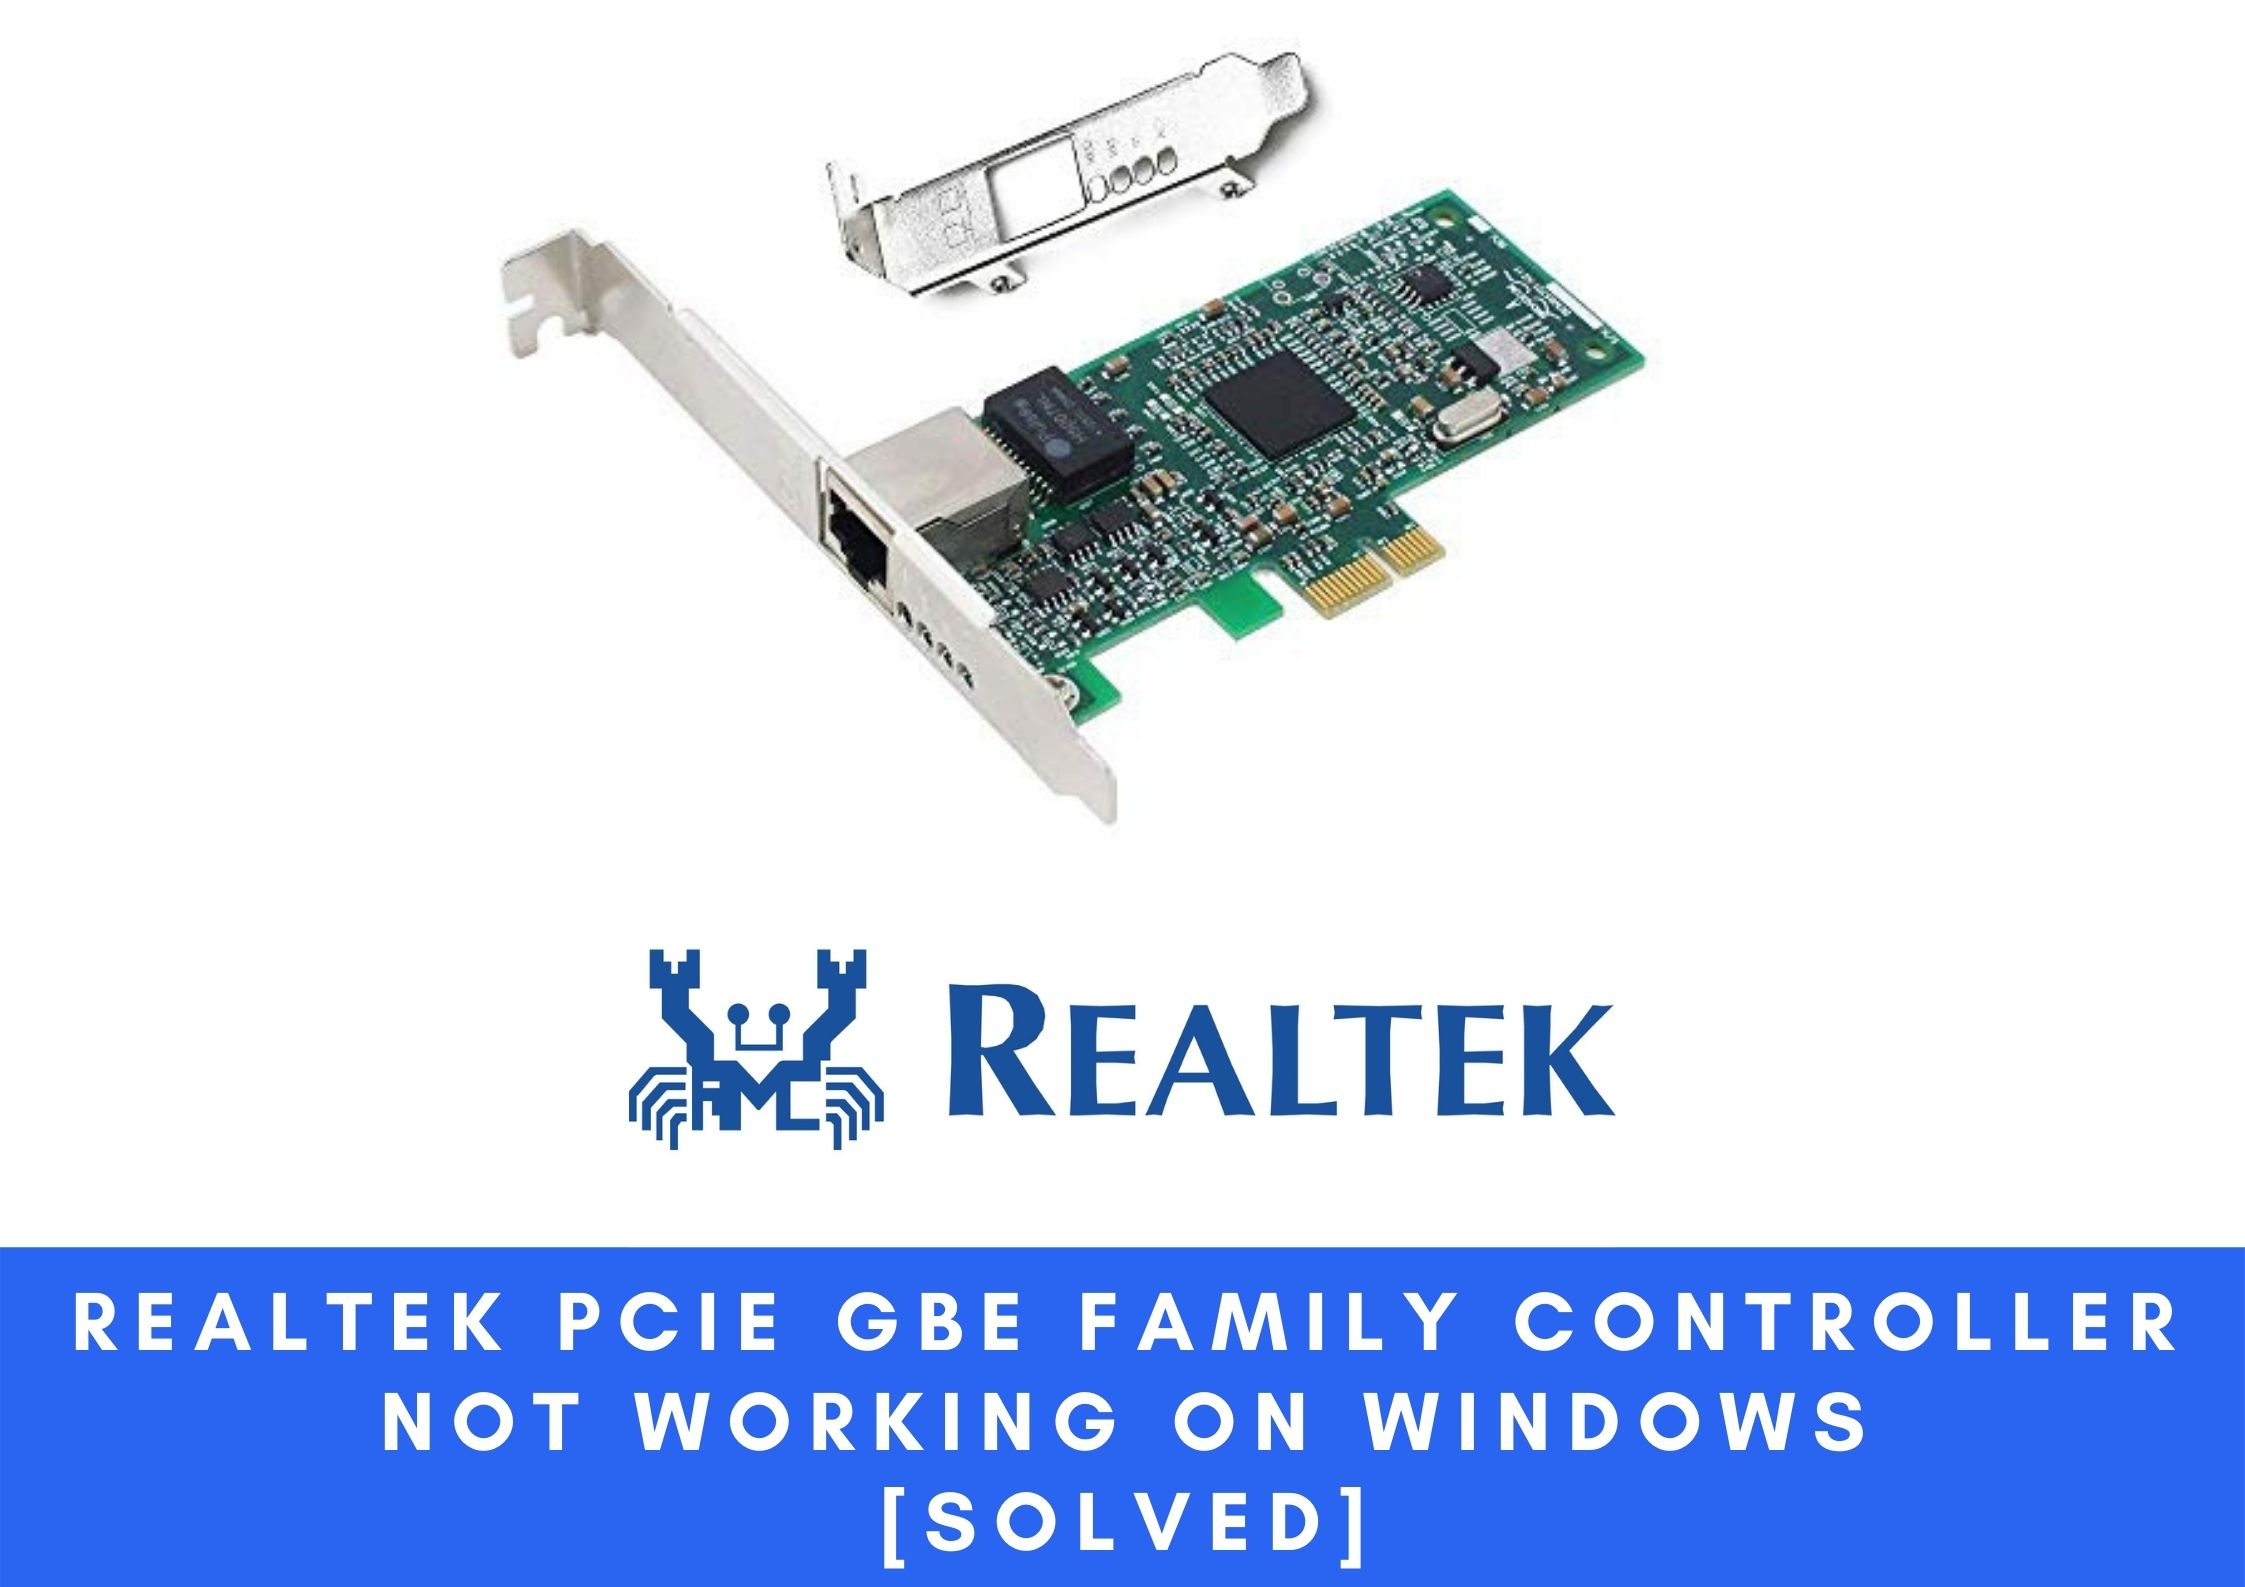 Realtek pcie gbe family controller driver download windows 10 download pokemon colosseum rom